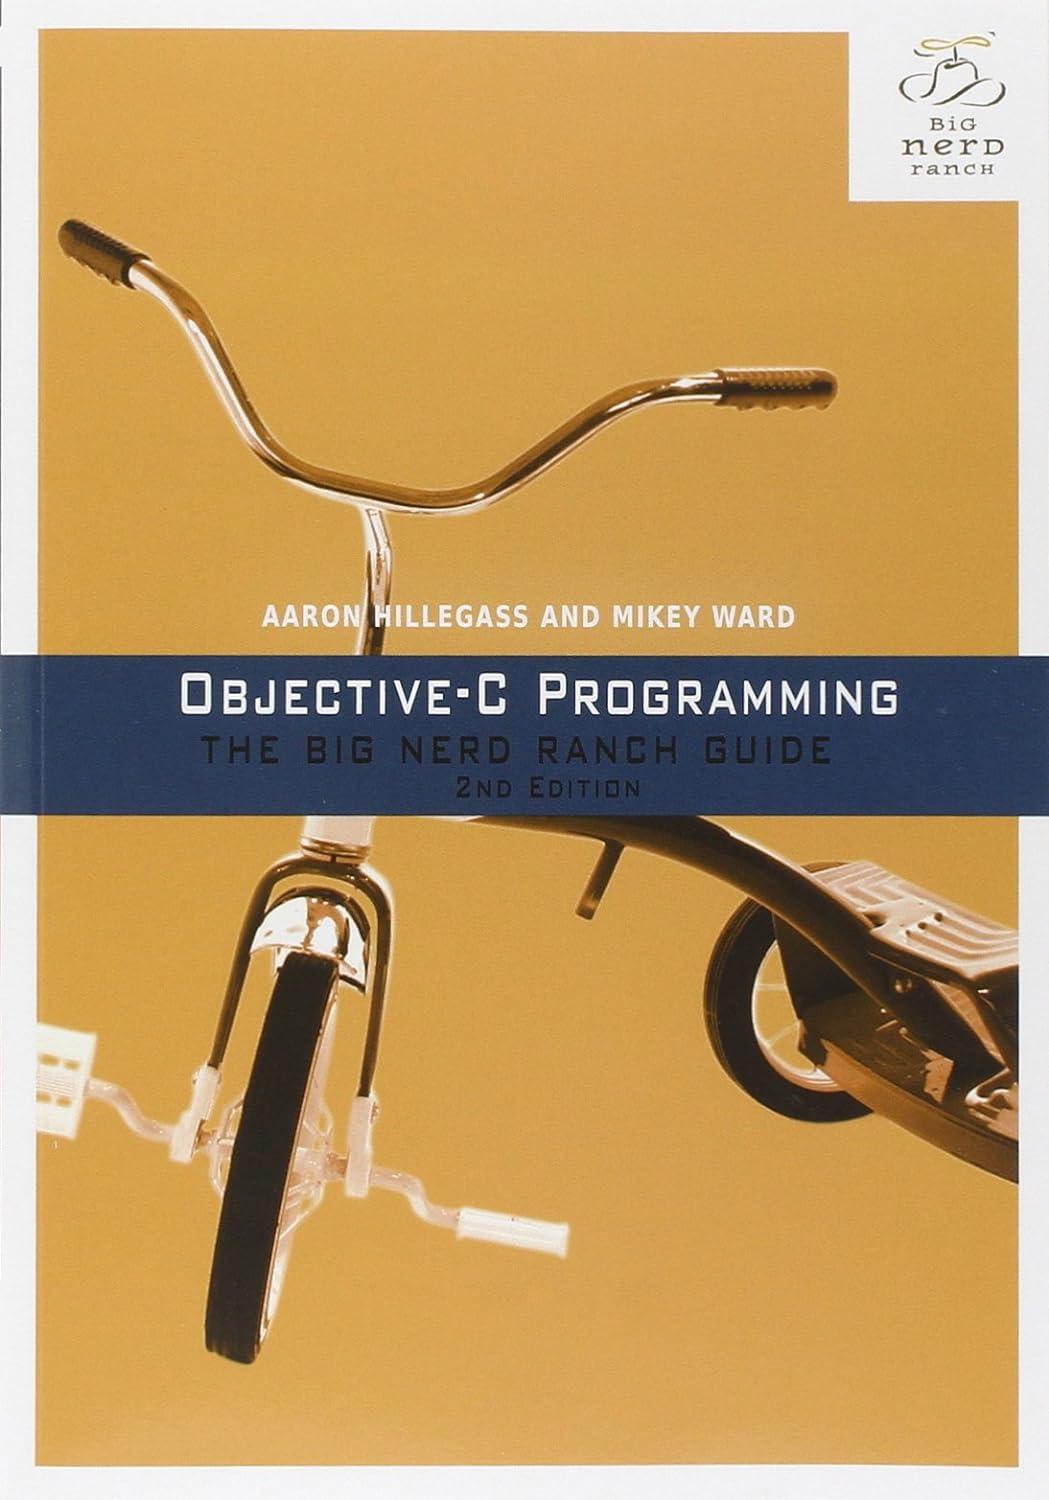 objective c programming the big nerd ranch guide 2nd edition aaron hillegass, mikey ward 032194206x,